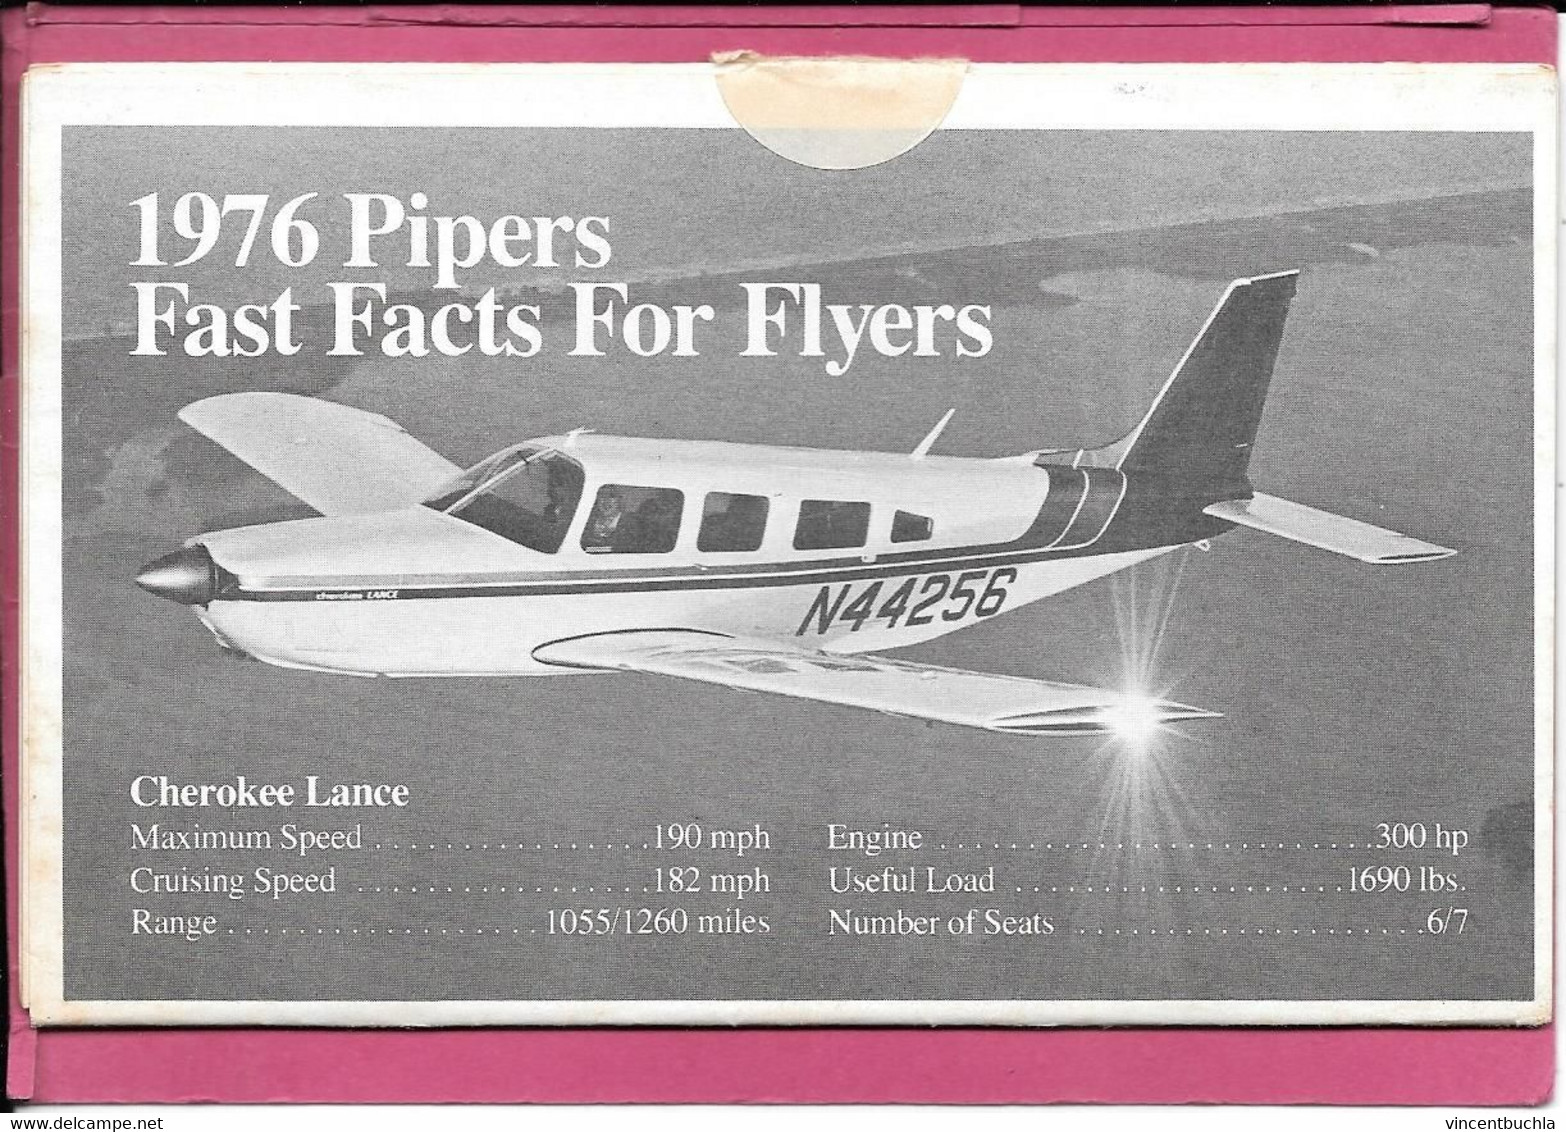 Dépliant Promotionnel U S A Piper Aircraft Corporation 1976 Fast Facts For Flyers 10 Feuillets - Advertisements